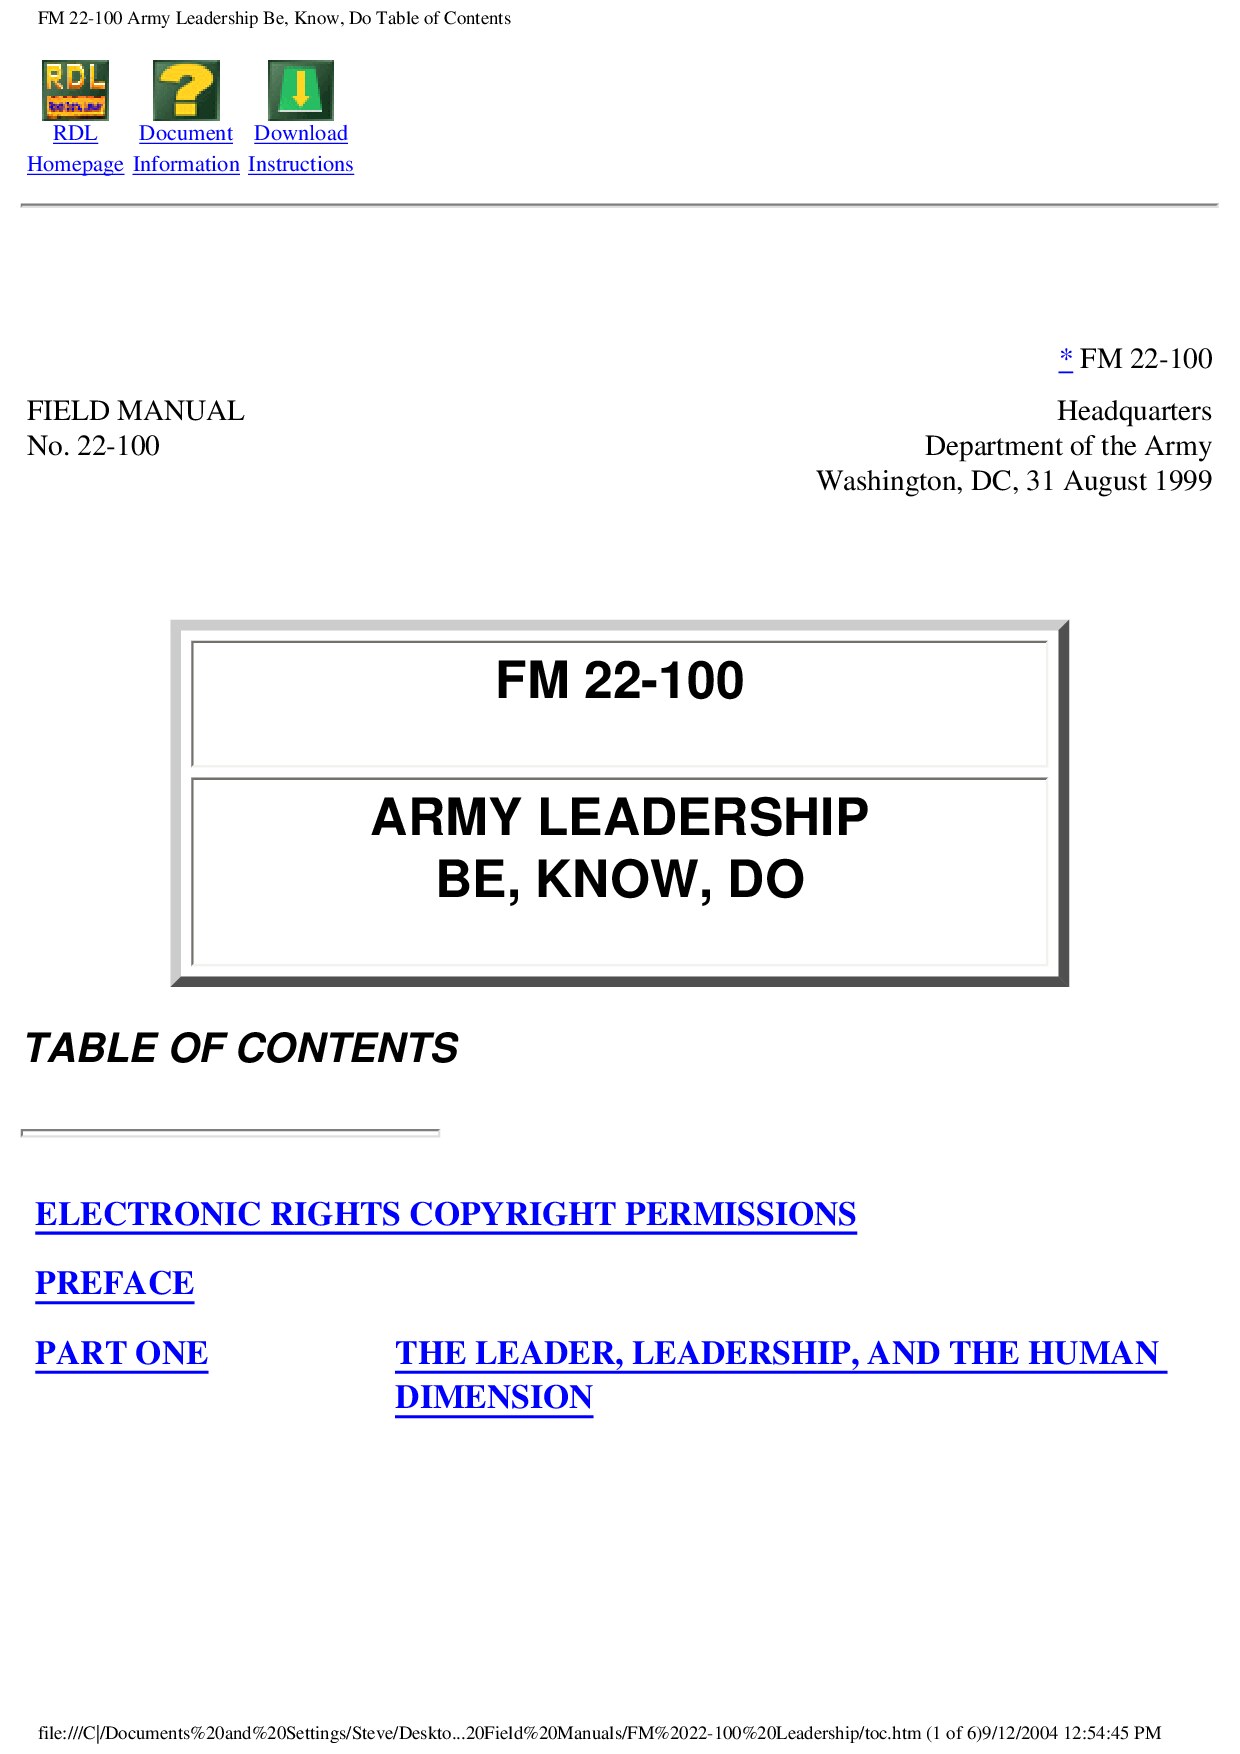 FM 22-100 Army Leadership Be, Know, Do Table of Contents